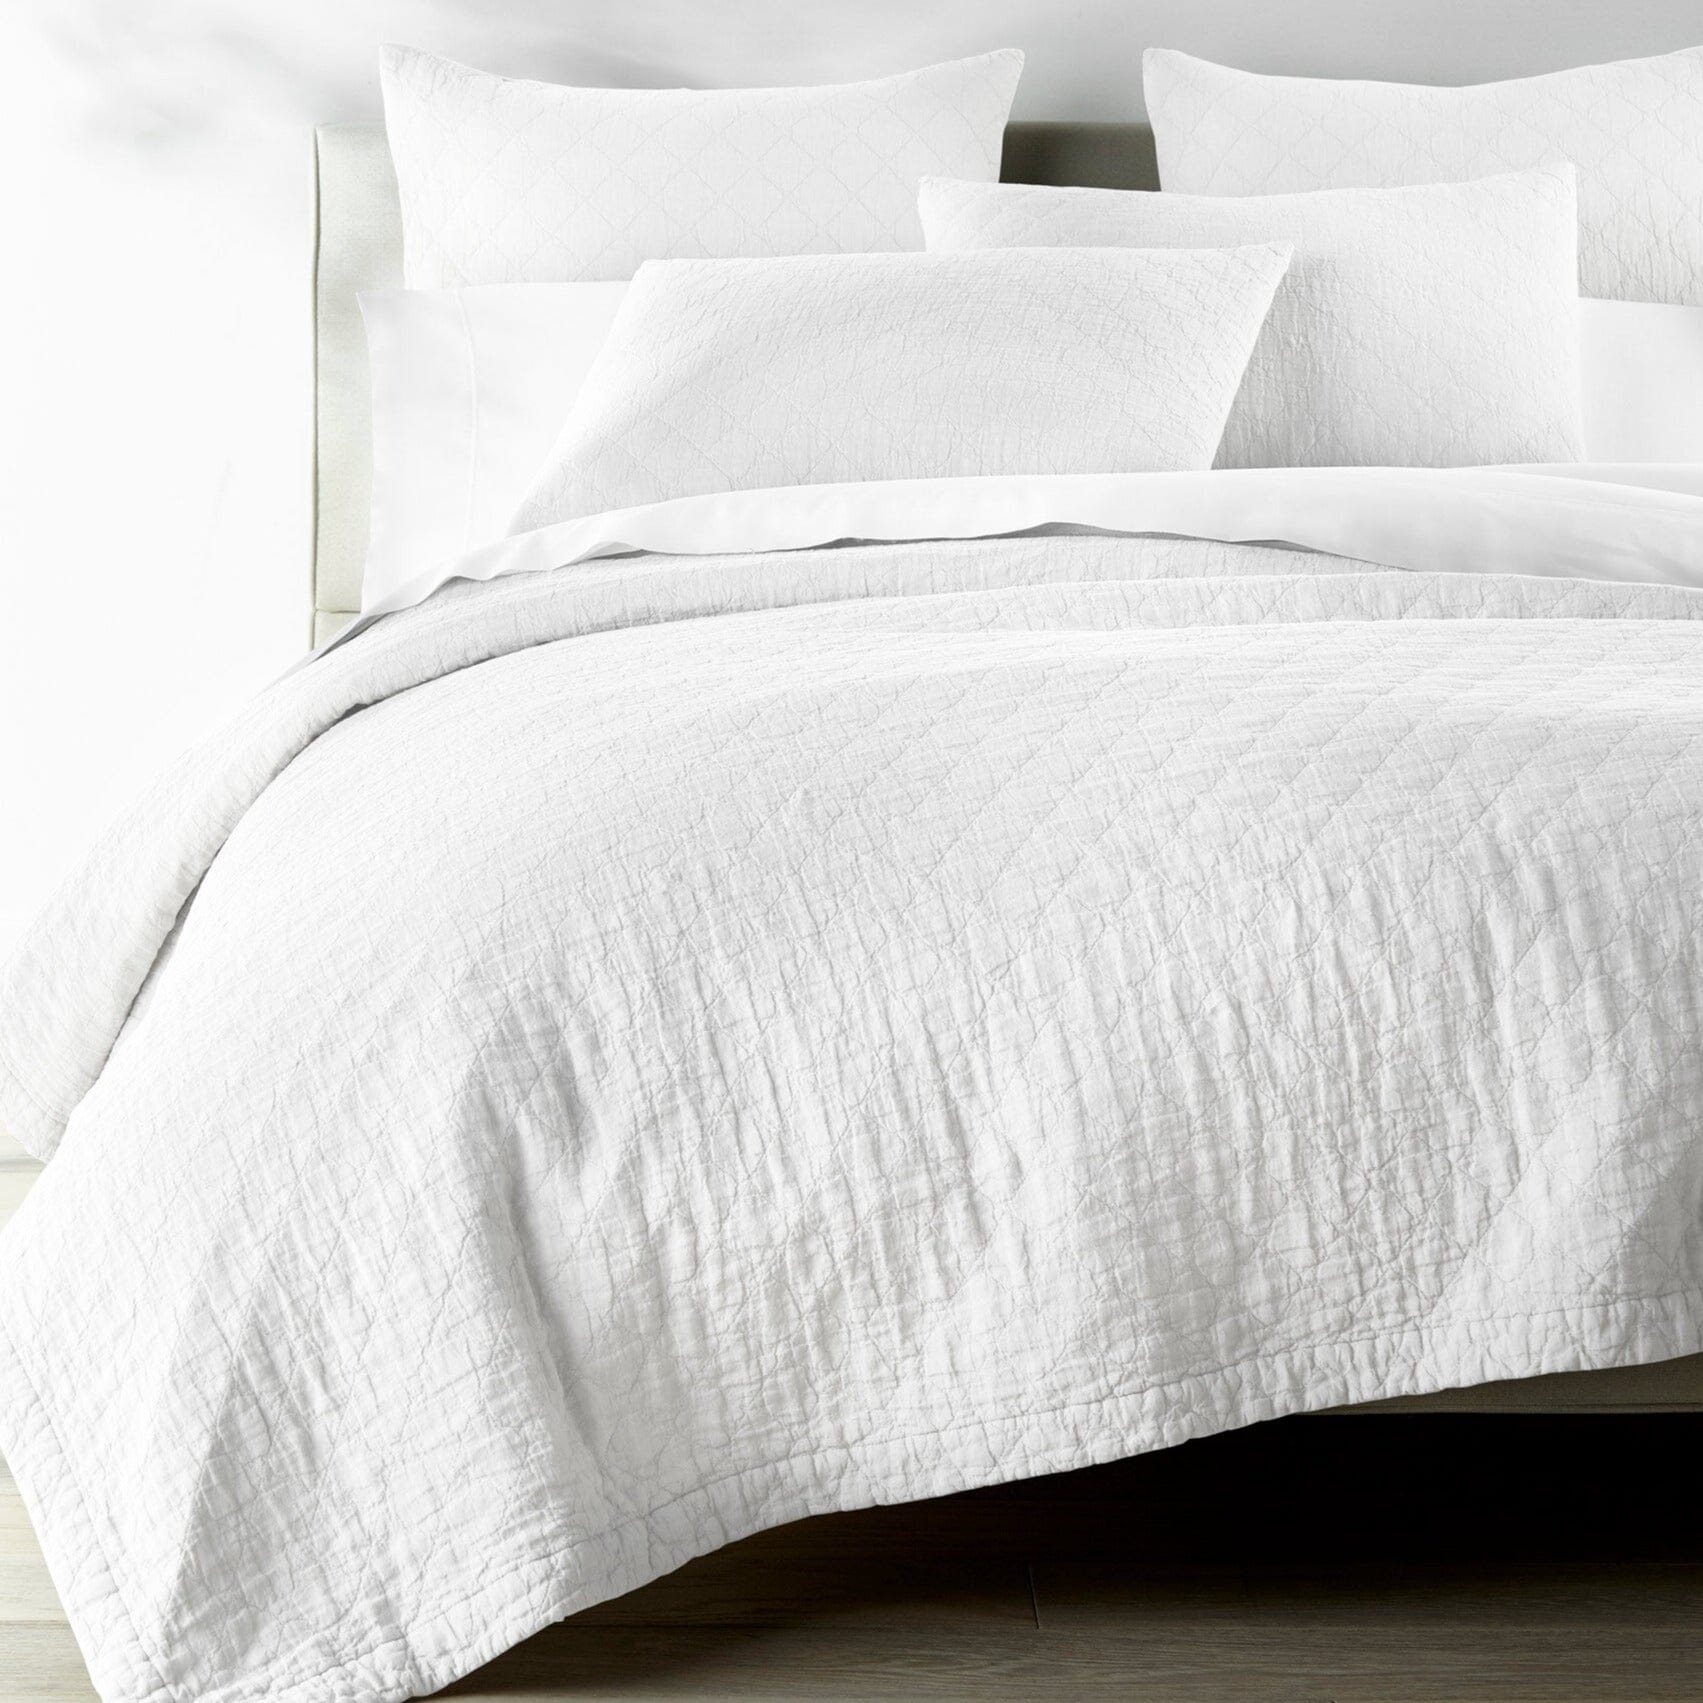 Peacock Alley Coverlet - Heritage Stone Washed Linen Quilt in White